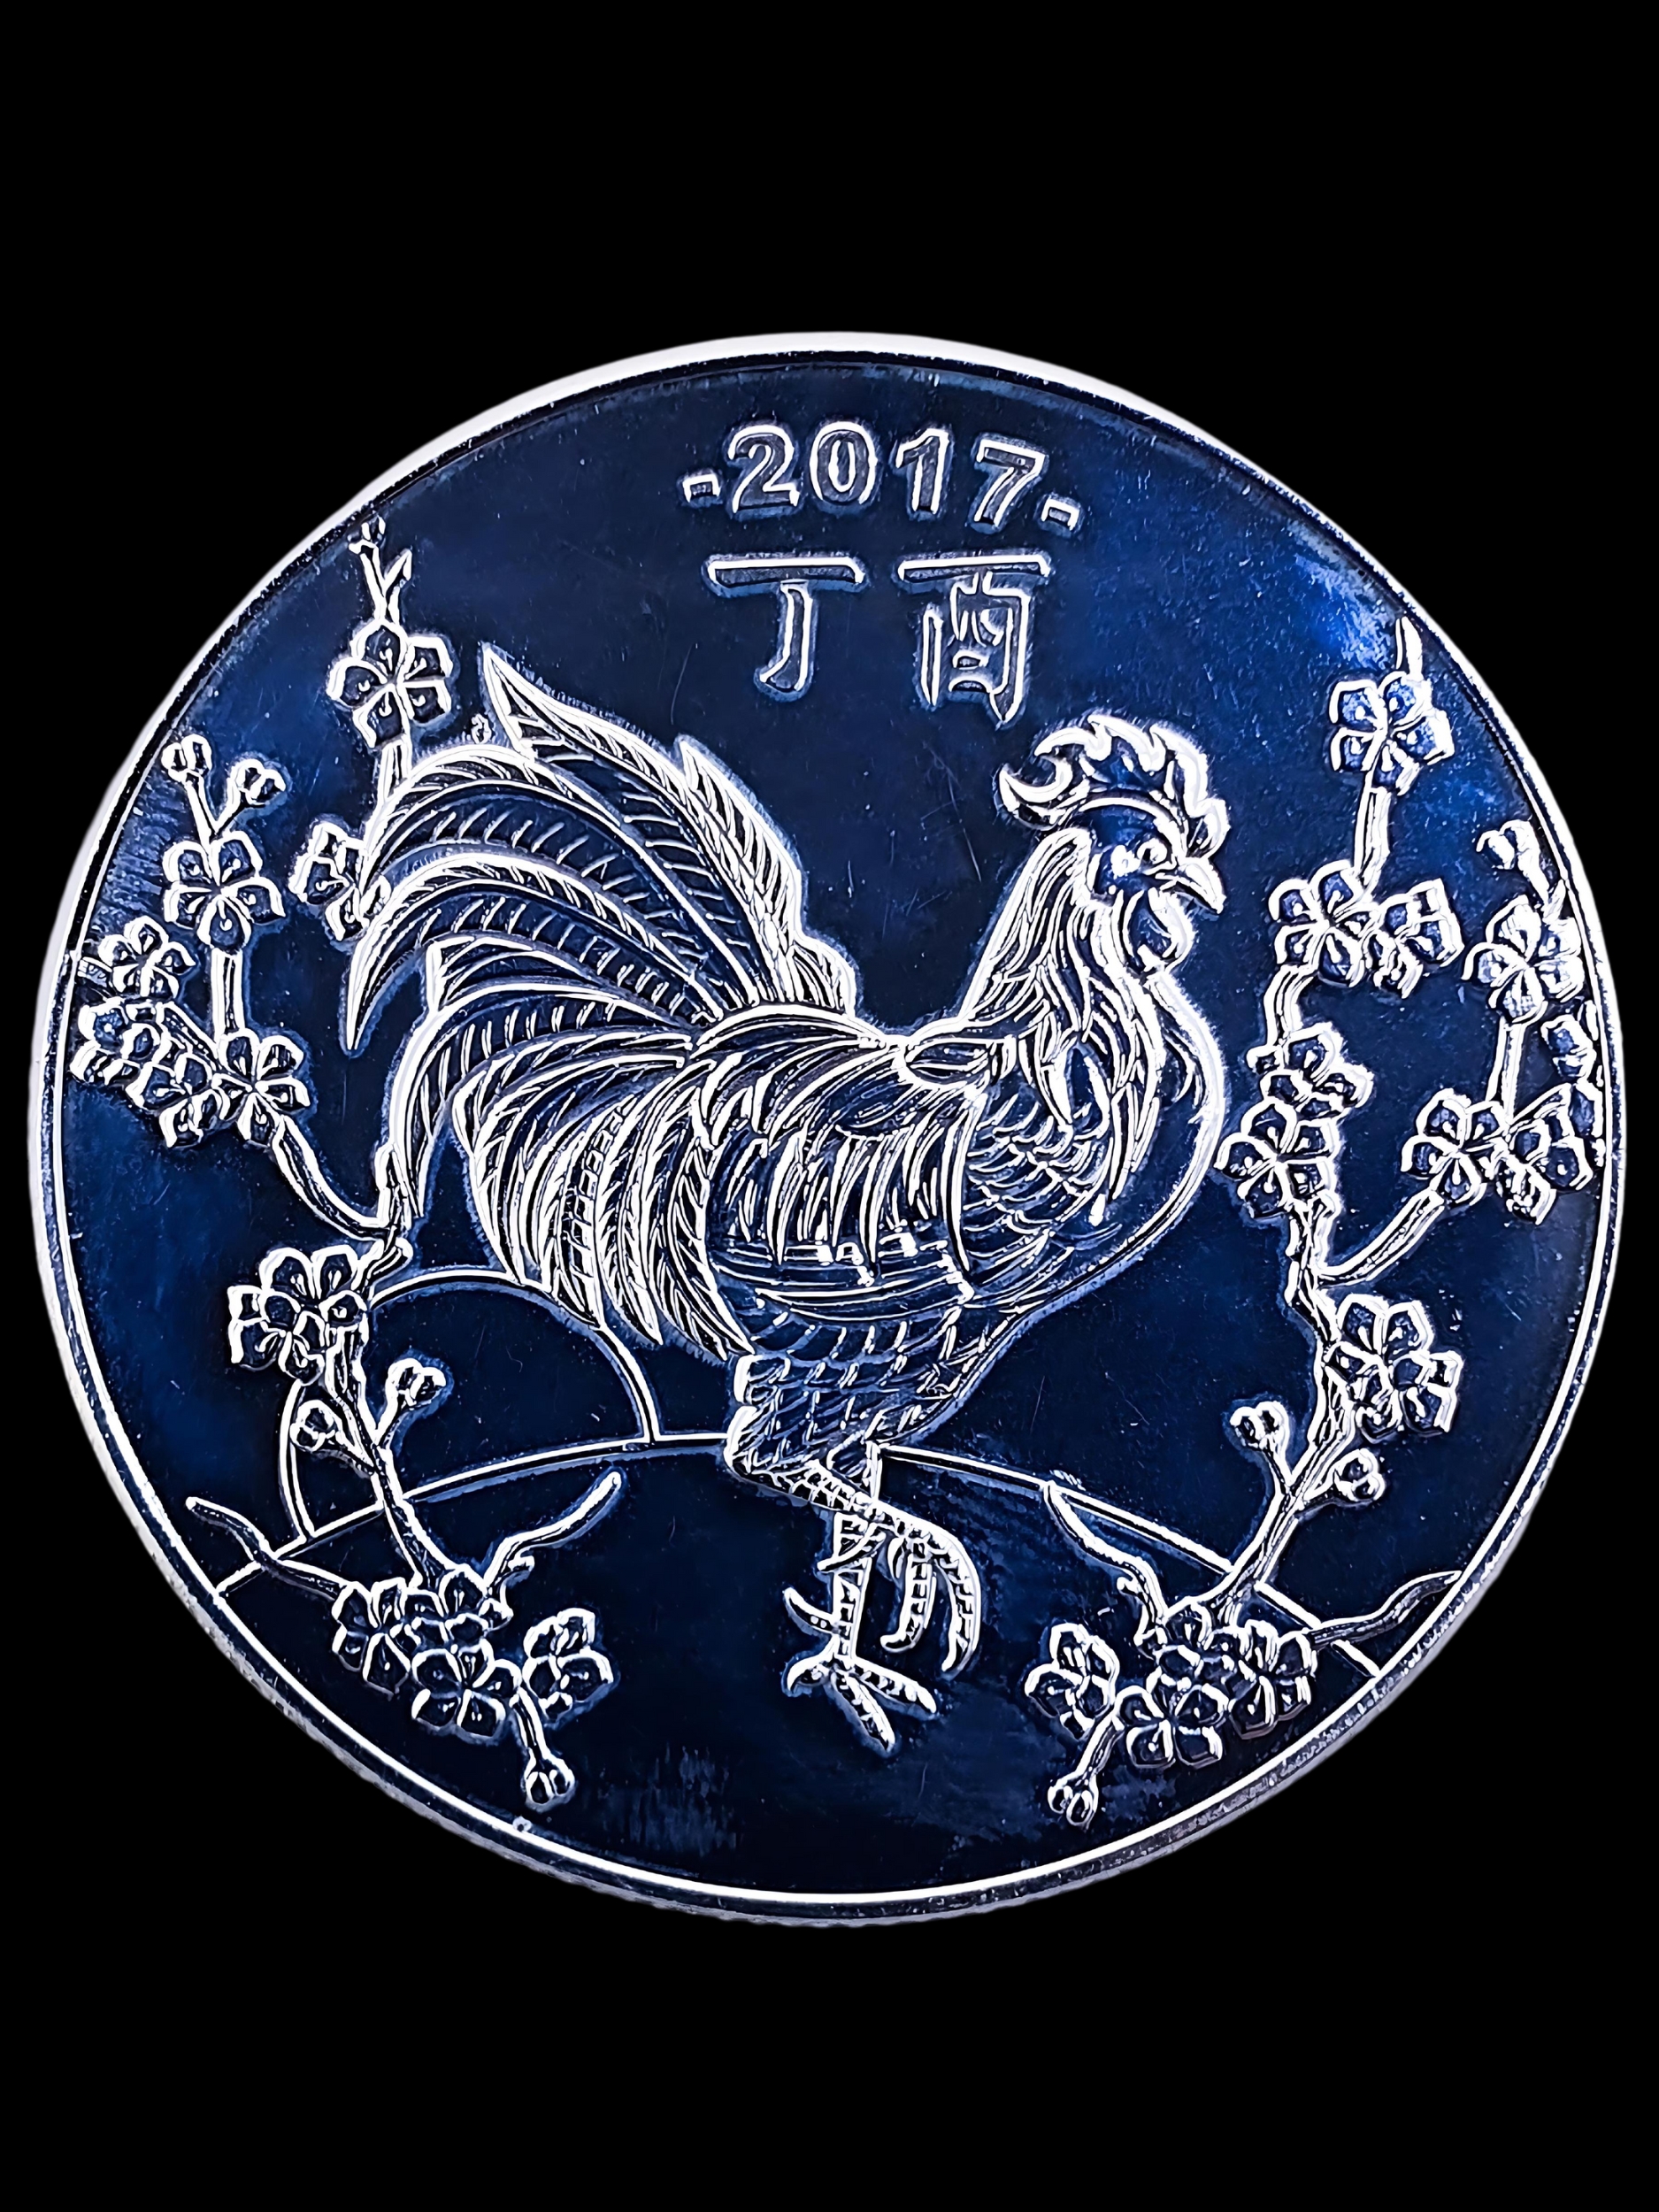 2017 Year Or The Rooster ABC Bullion Silver Coin